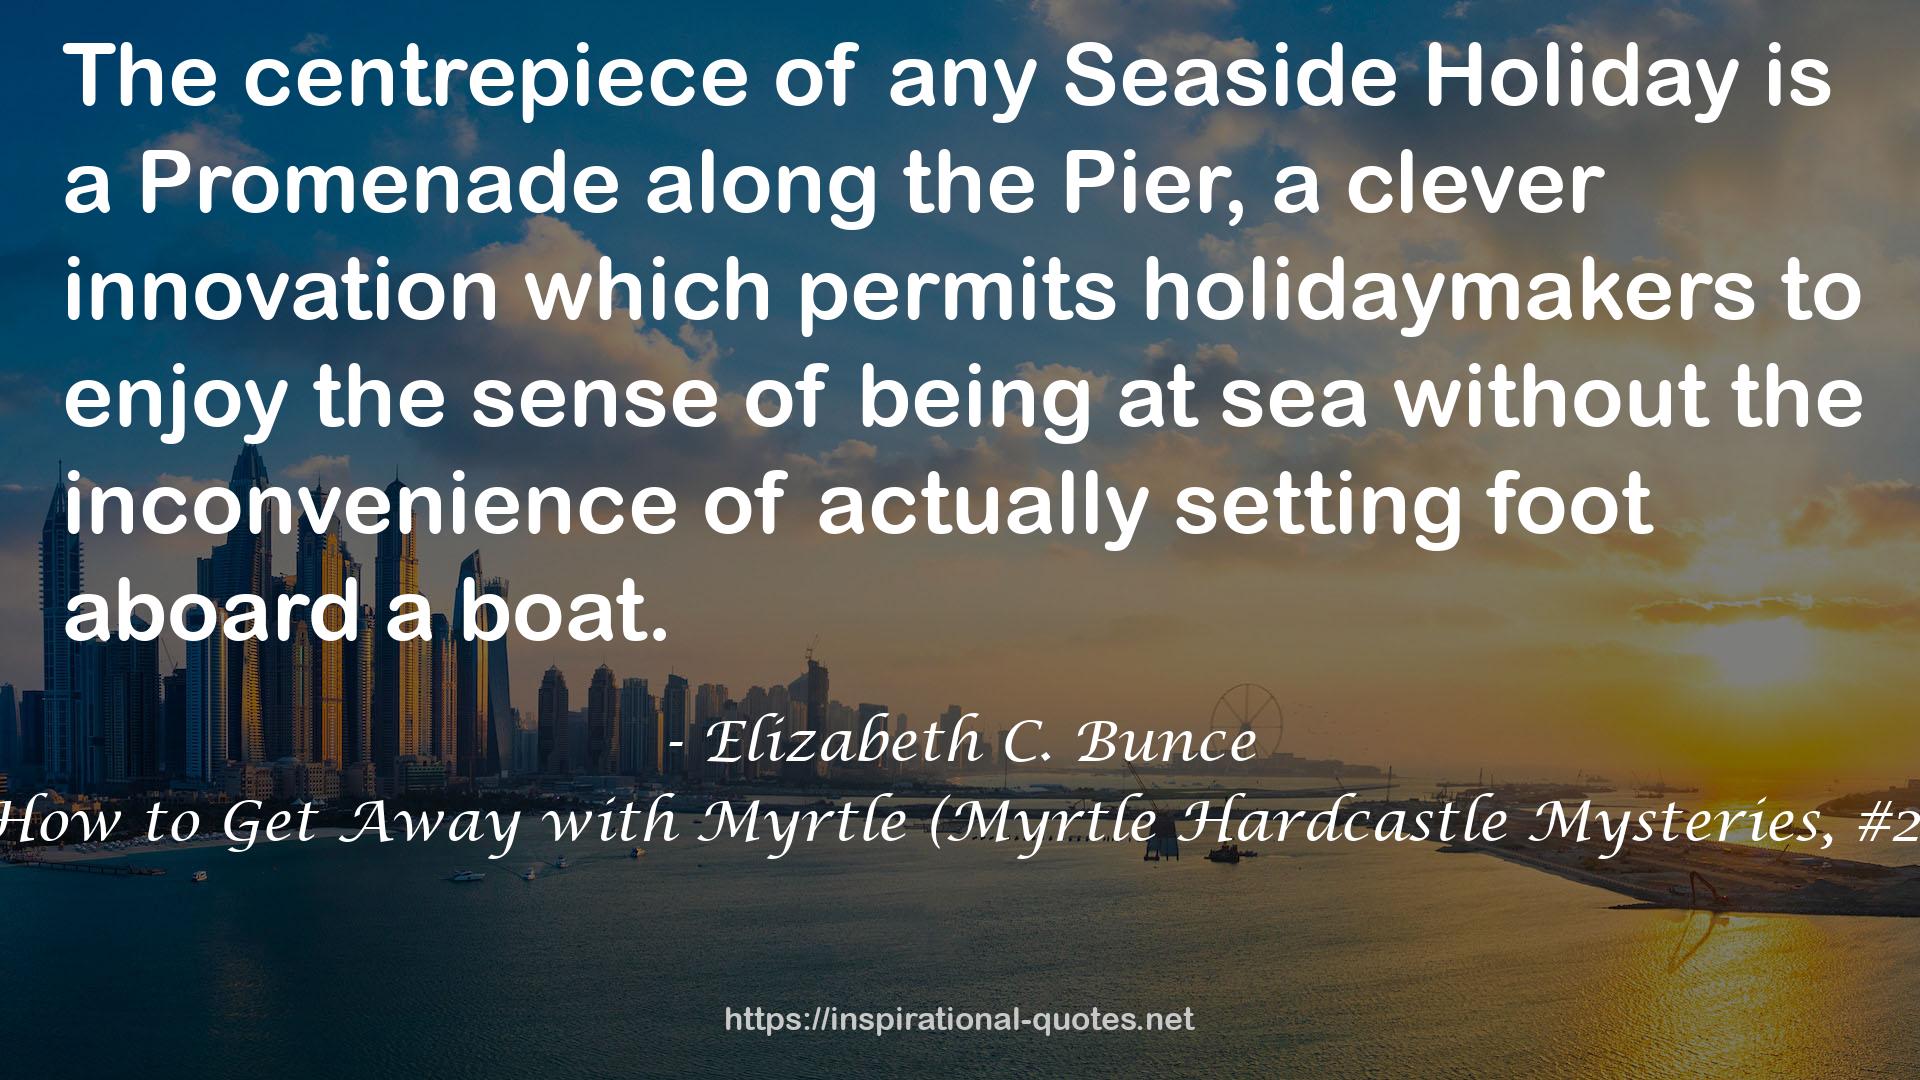 How to Get Away with Myrtle (Myrtle Hardcastle Mysteries, #2) QUOTES